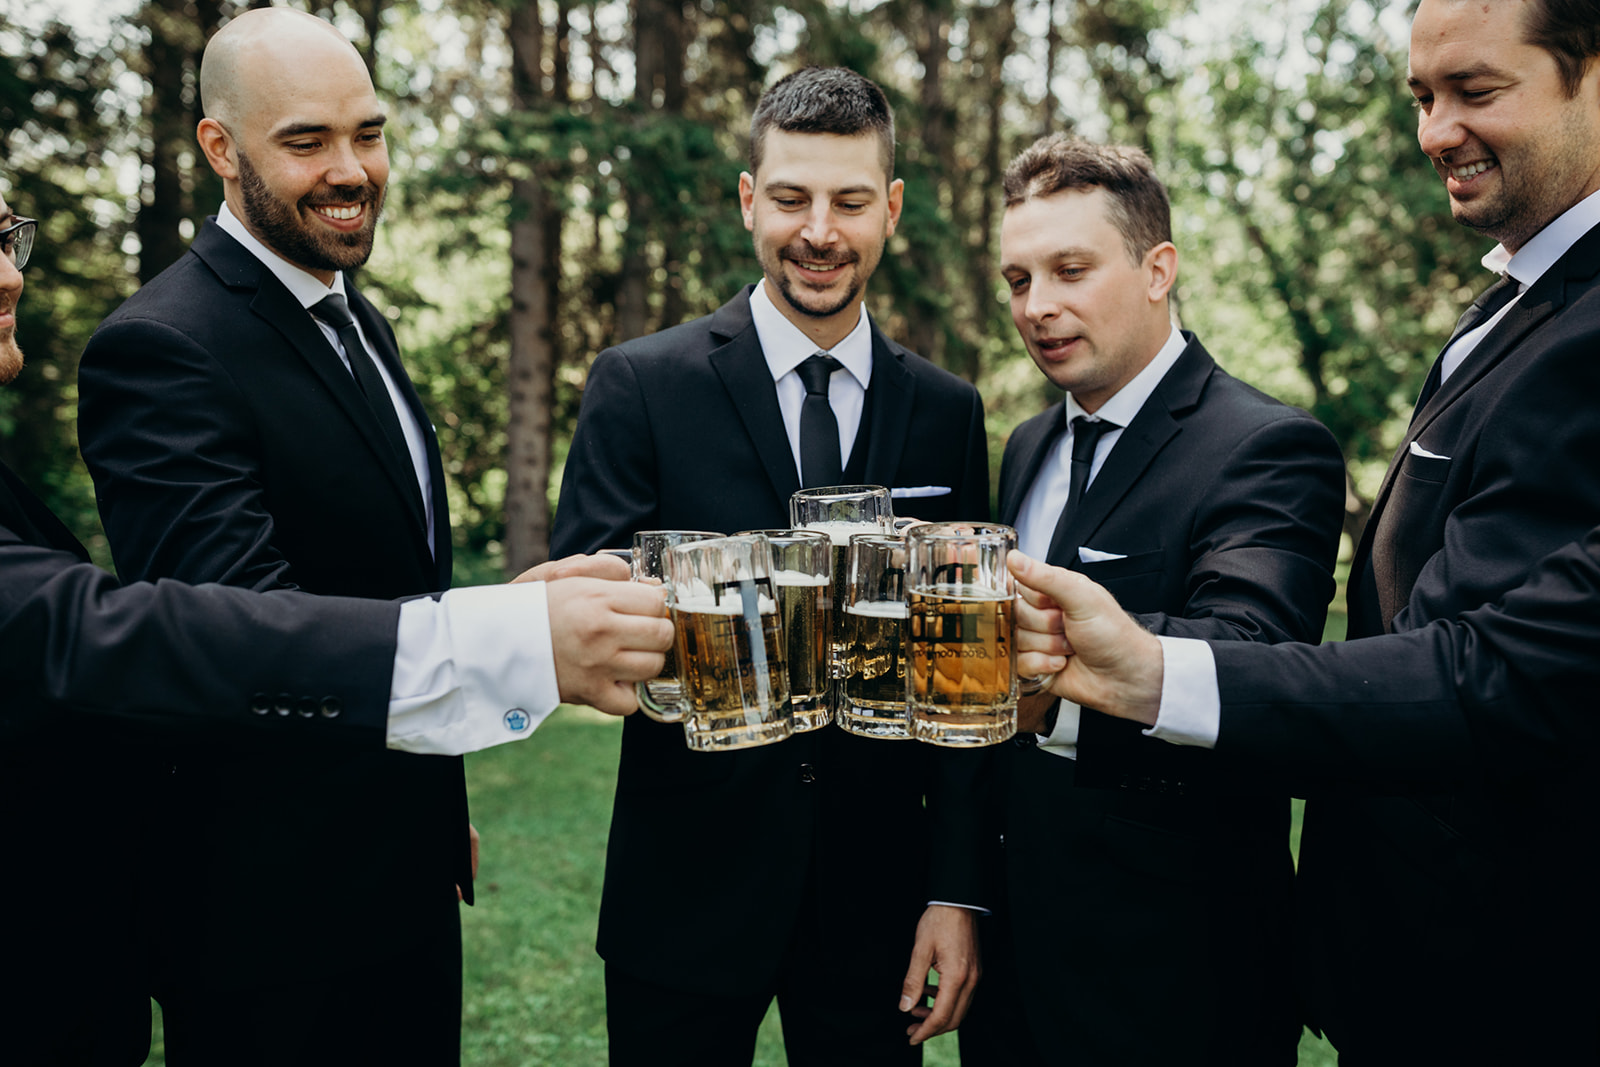 Groomsmen cheers on their wedding day before the wedding reception